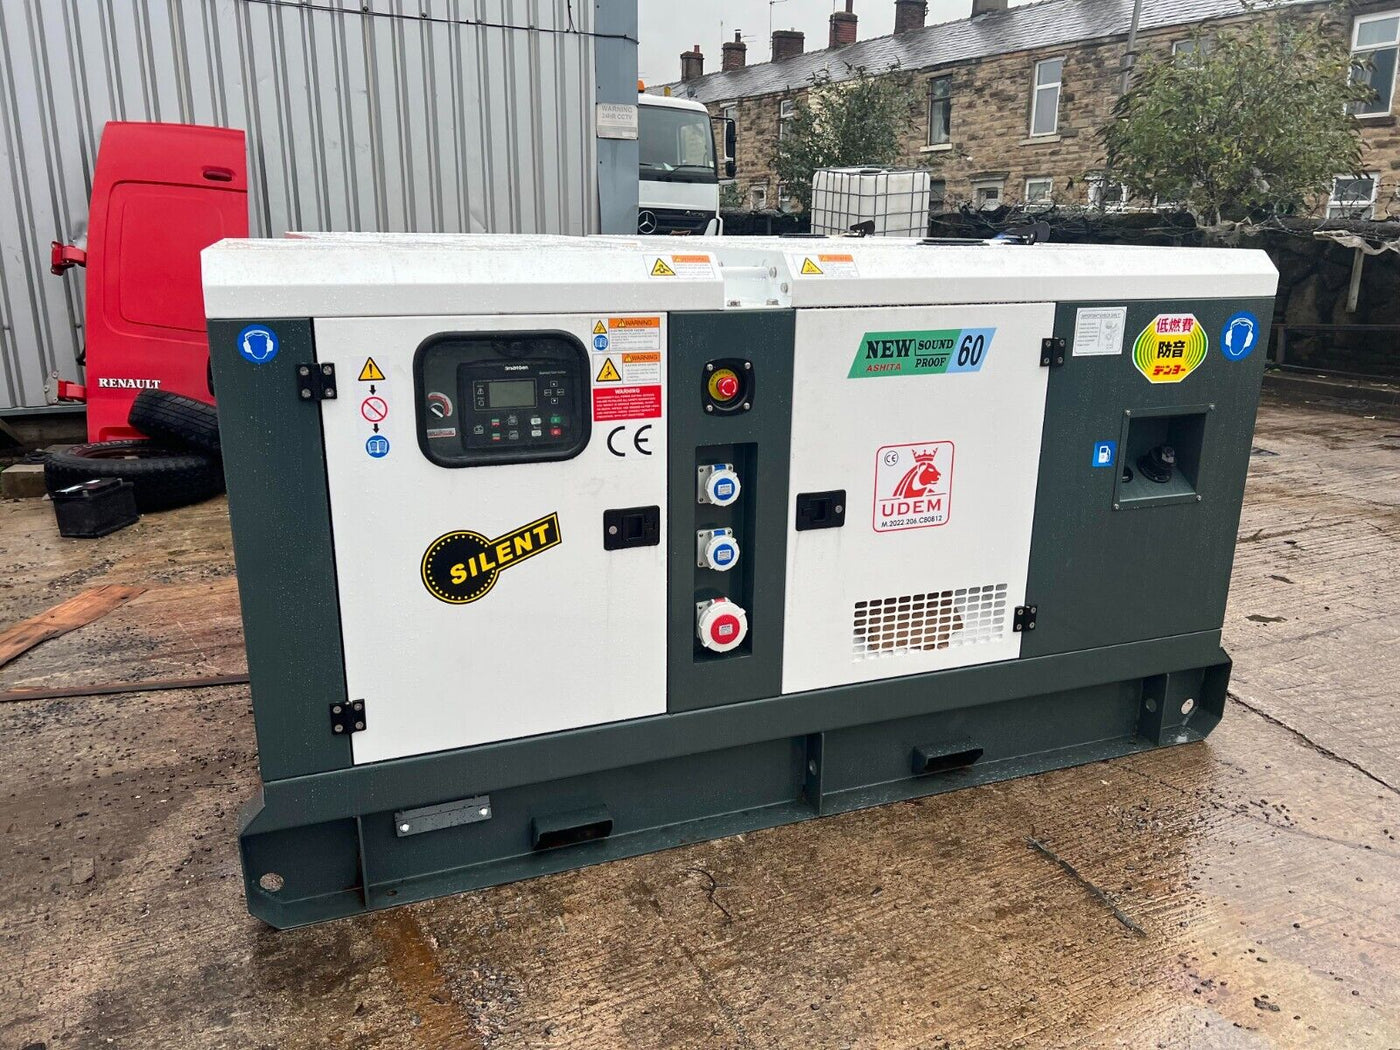 Exciting News: 60kVA Generator Supplied to Turf Sports Company